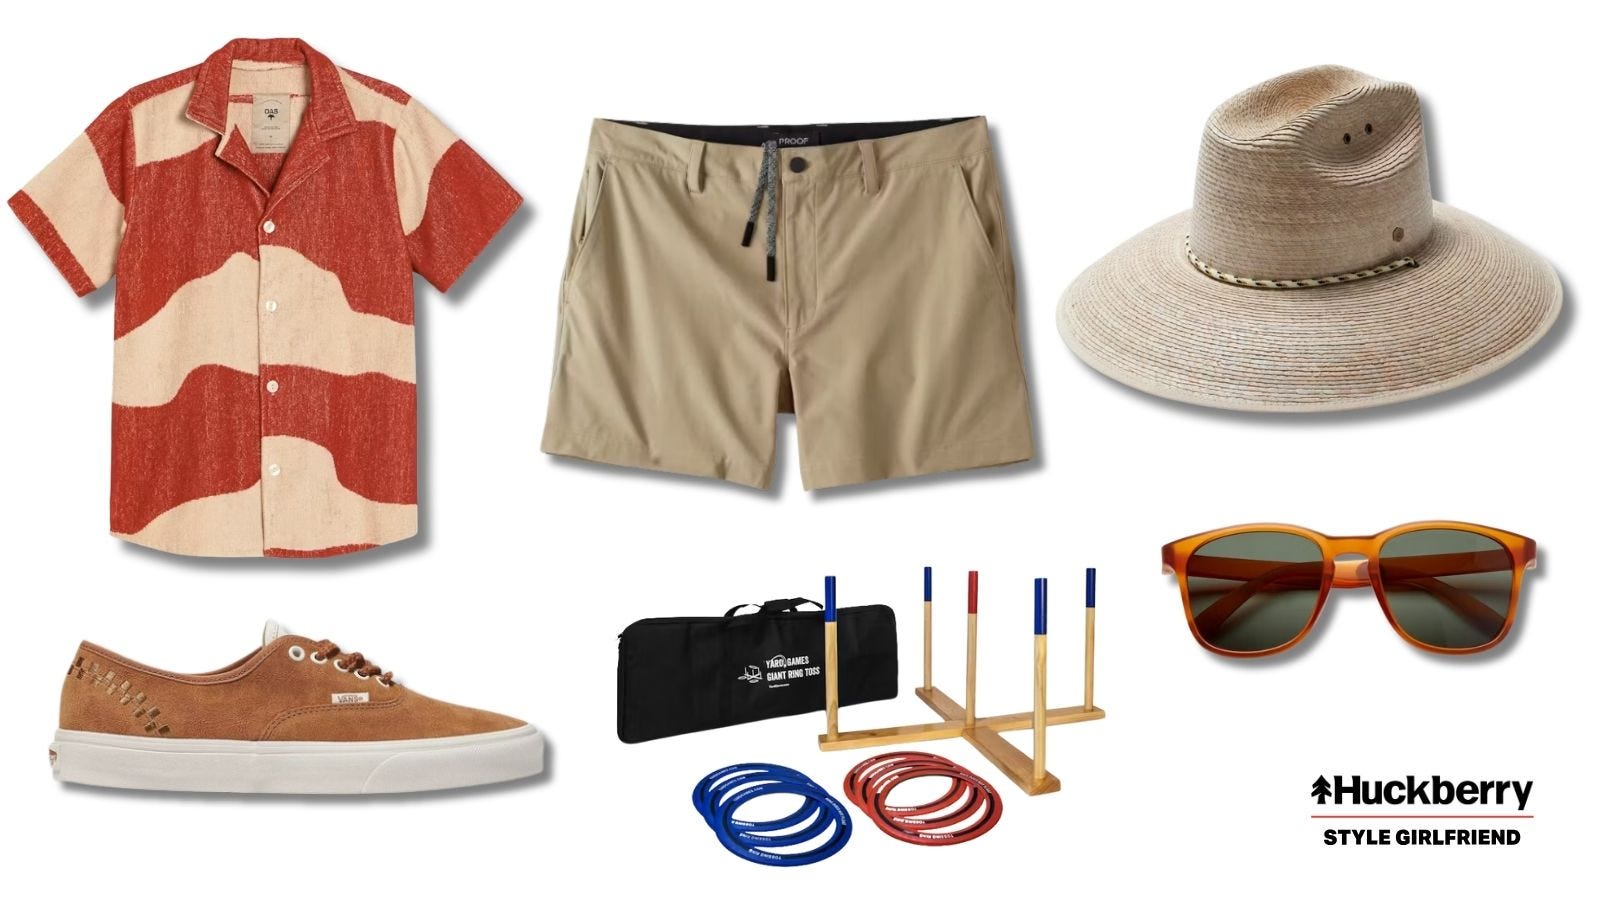 collage image of men's summer outfit including a red and tan short sleeve button down shirt, tan shorts, a wide-brimmed hat, vans sneakers, and sunglasses